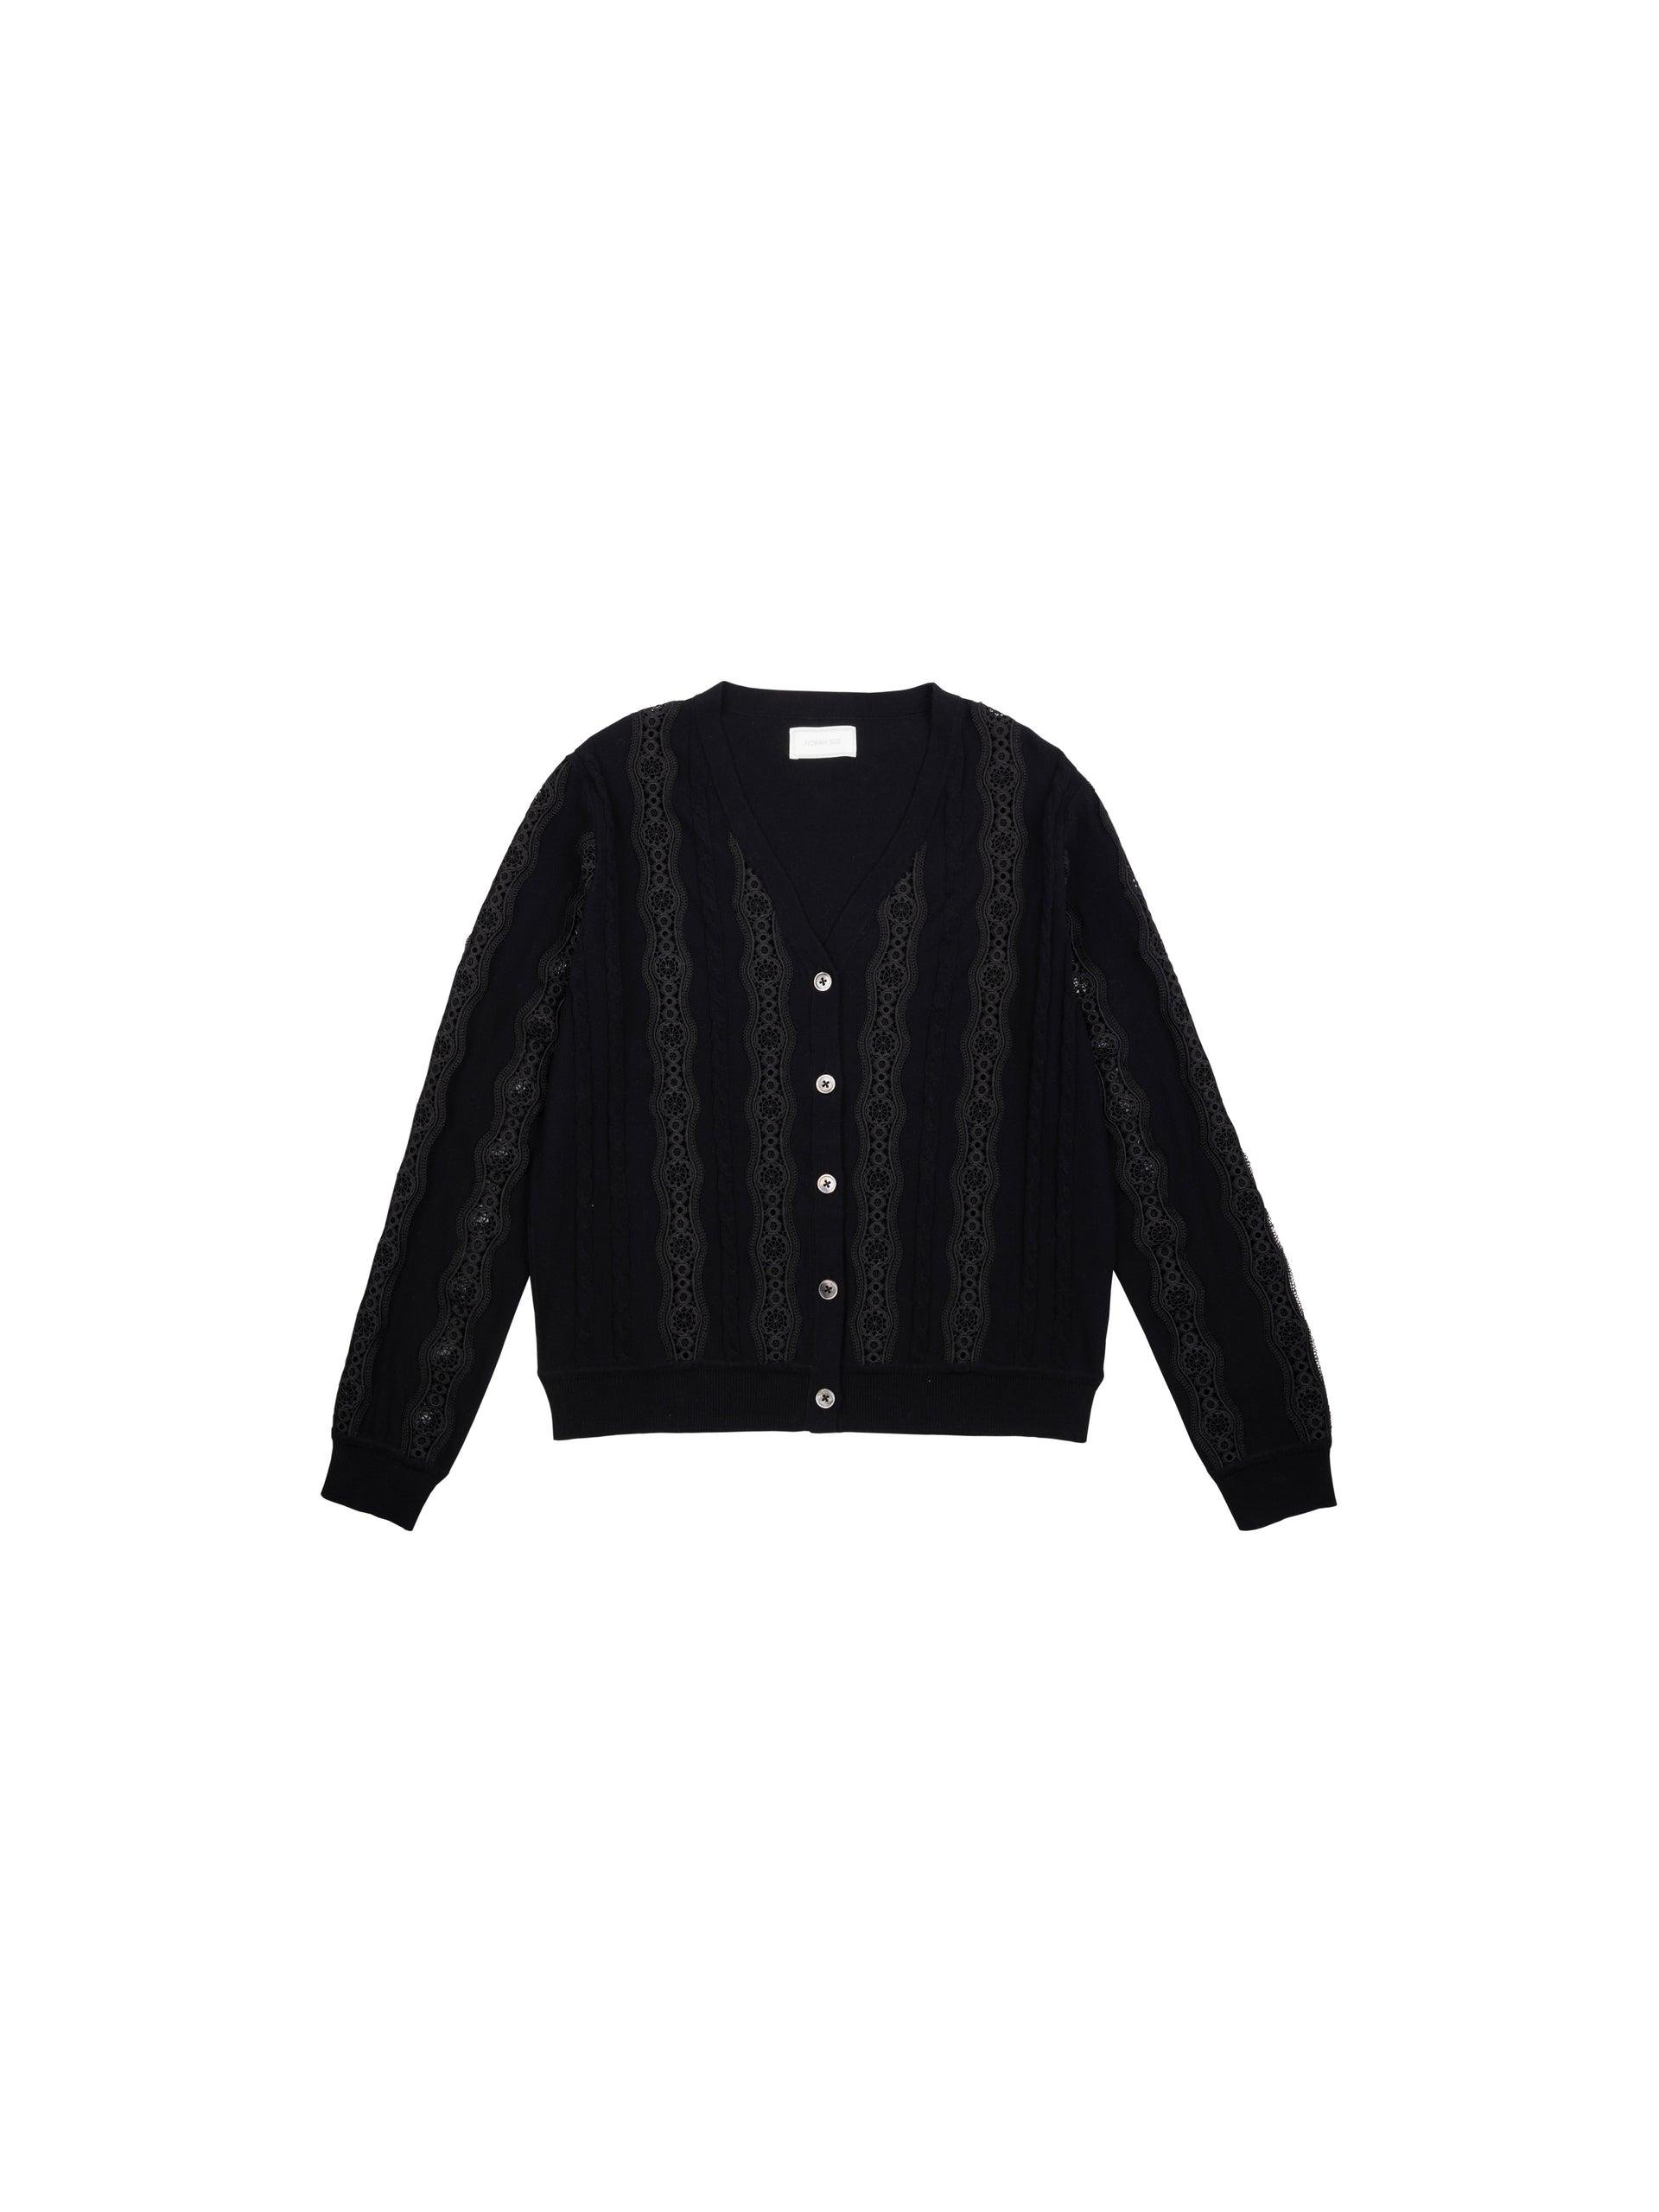 NORAH SUE Lace Trim Cardigan by COCKTAIL